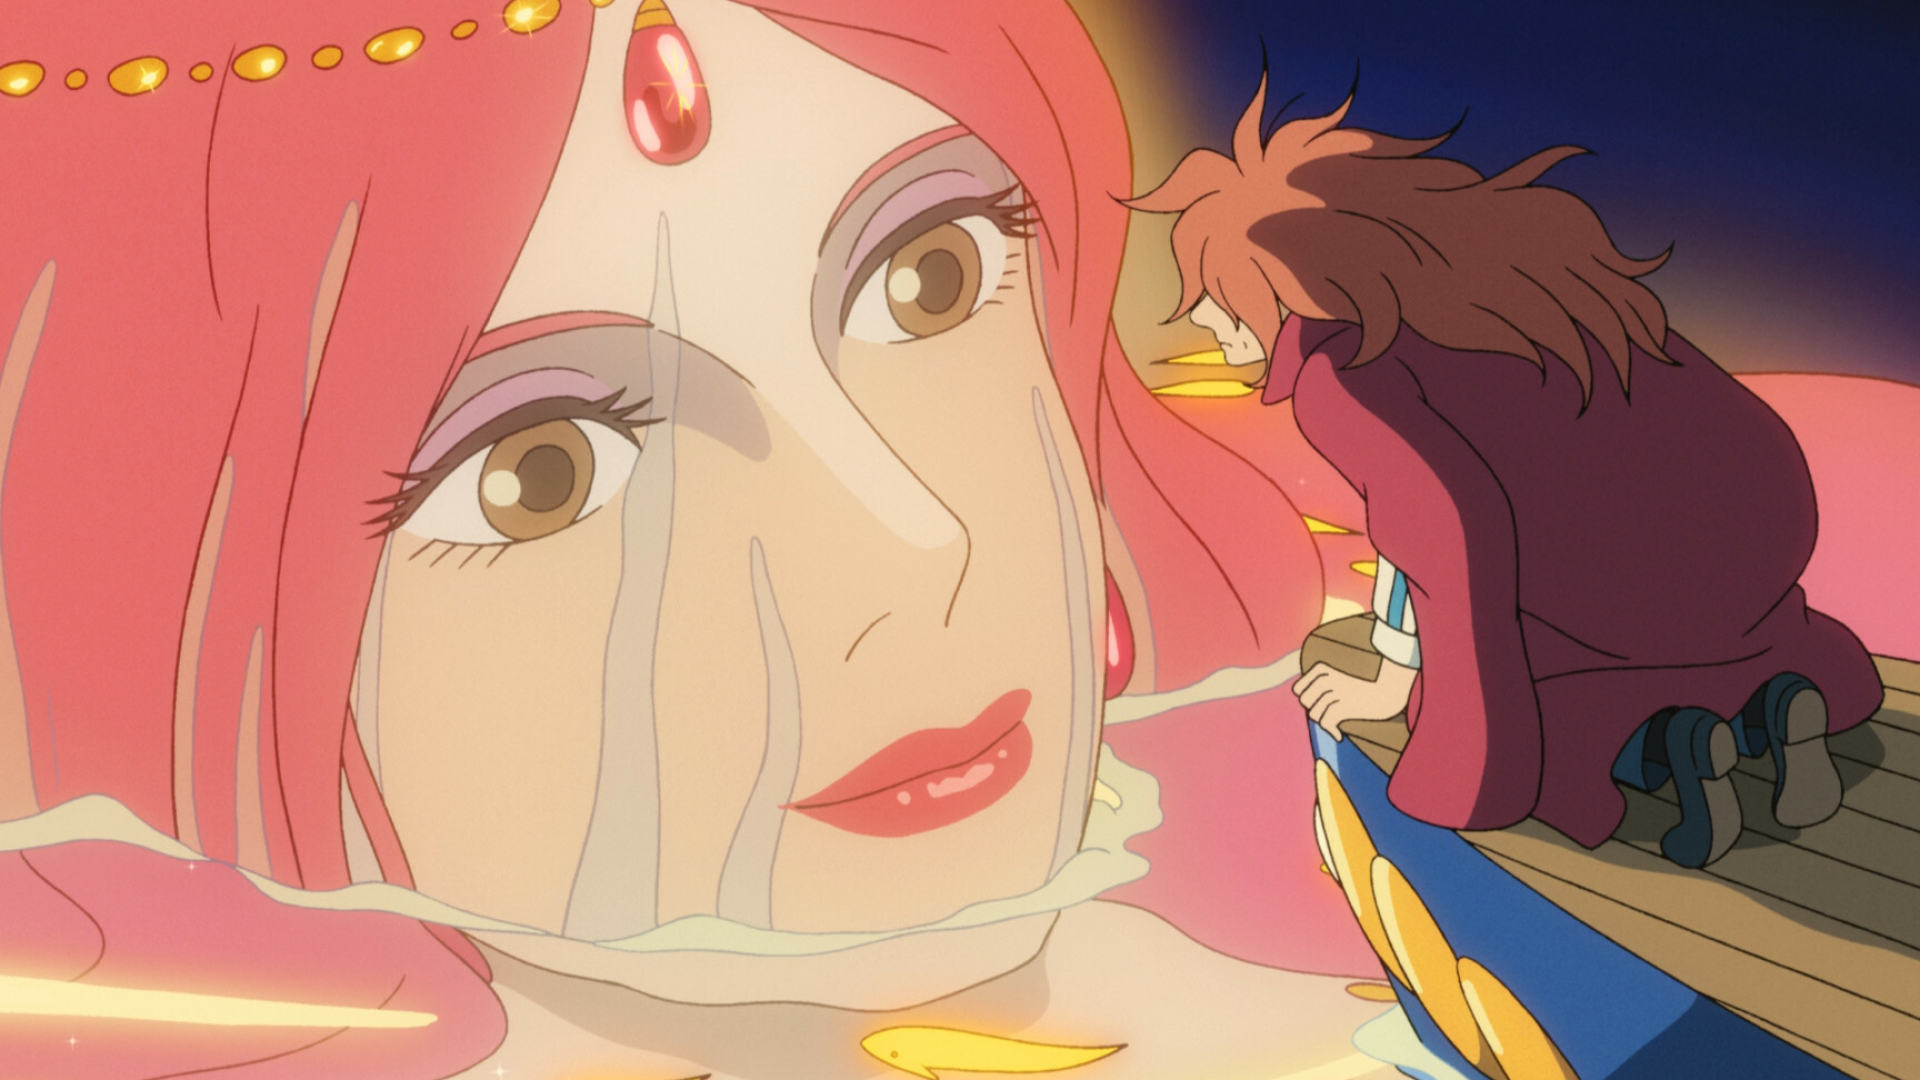 Ponyo: Granmamare, the Goddess of Mercy and the Queen of the ocean. 1920x1080 Full HD Wallpaper.